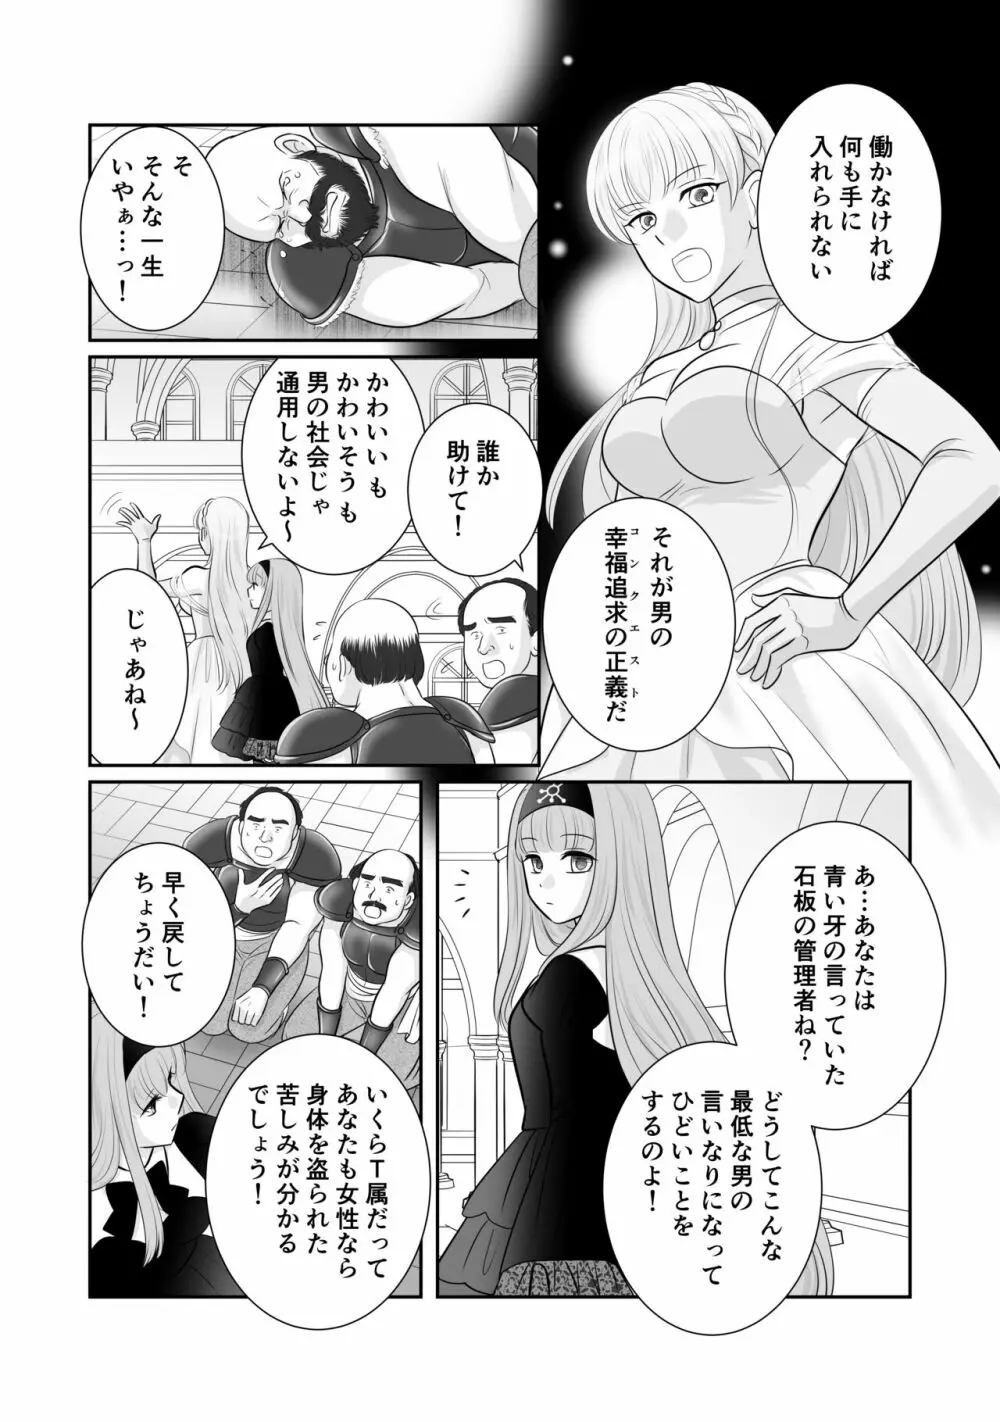 Misogyny Conquest Chapter 6 16ページ